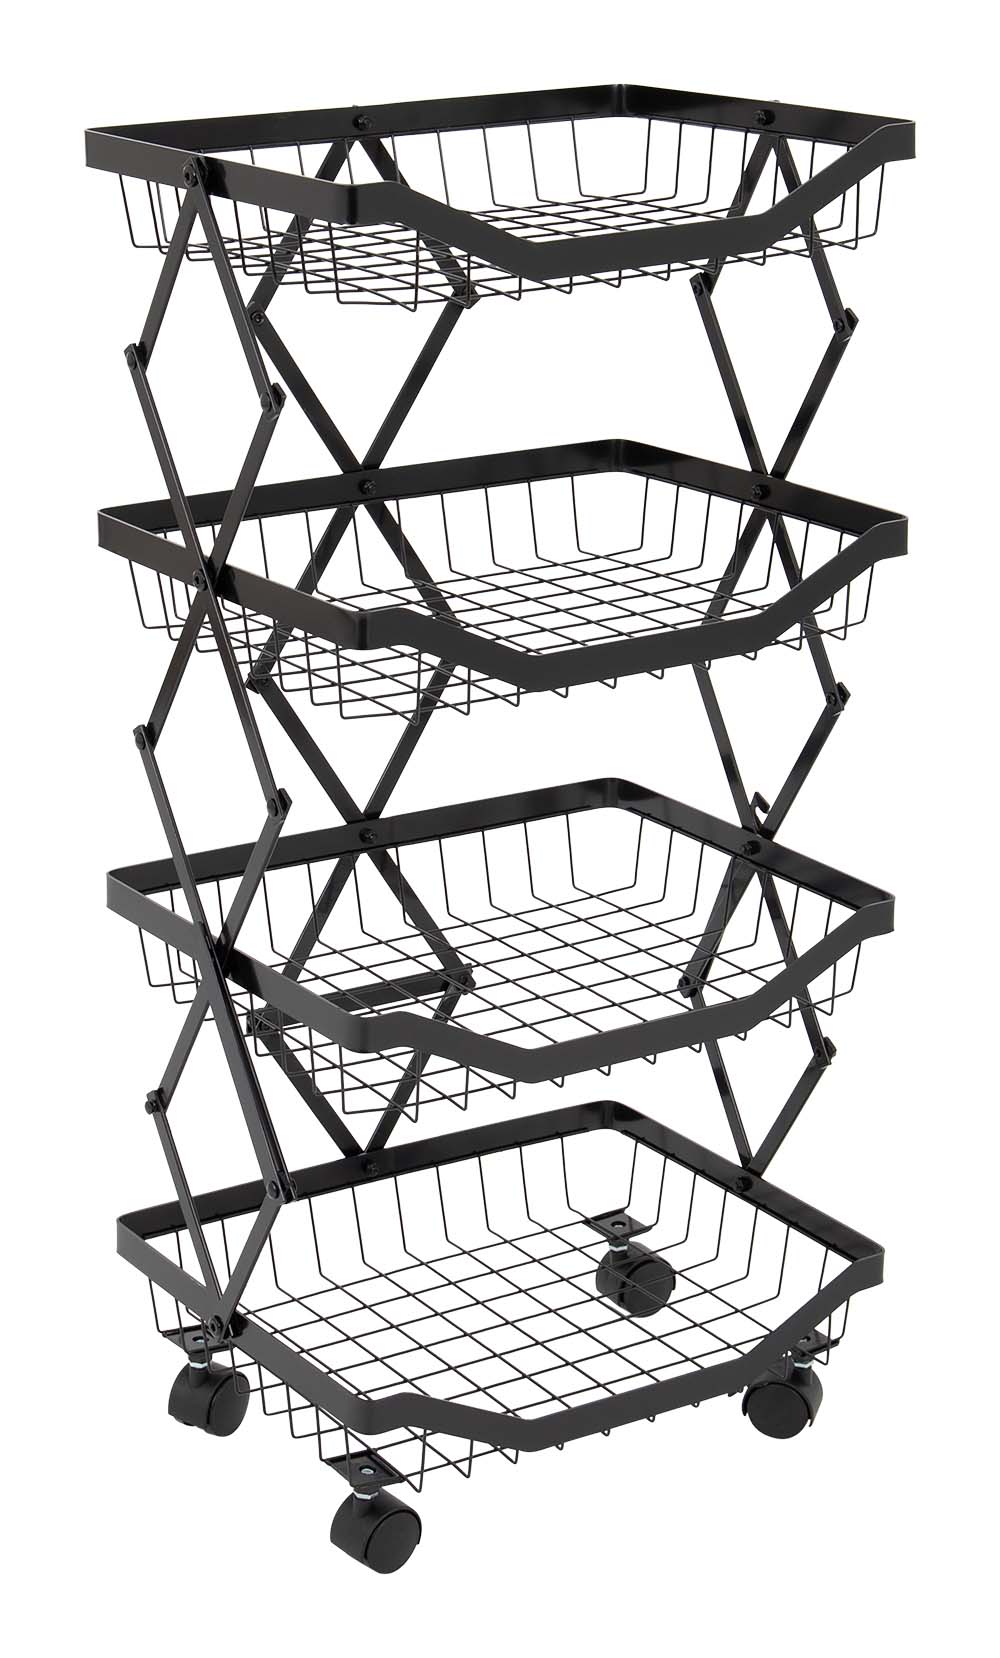 Bo-Camp - Industrial collection - Storage rack - Braddock